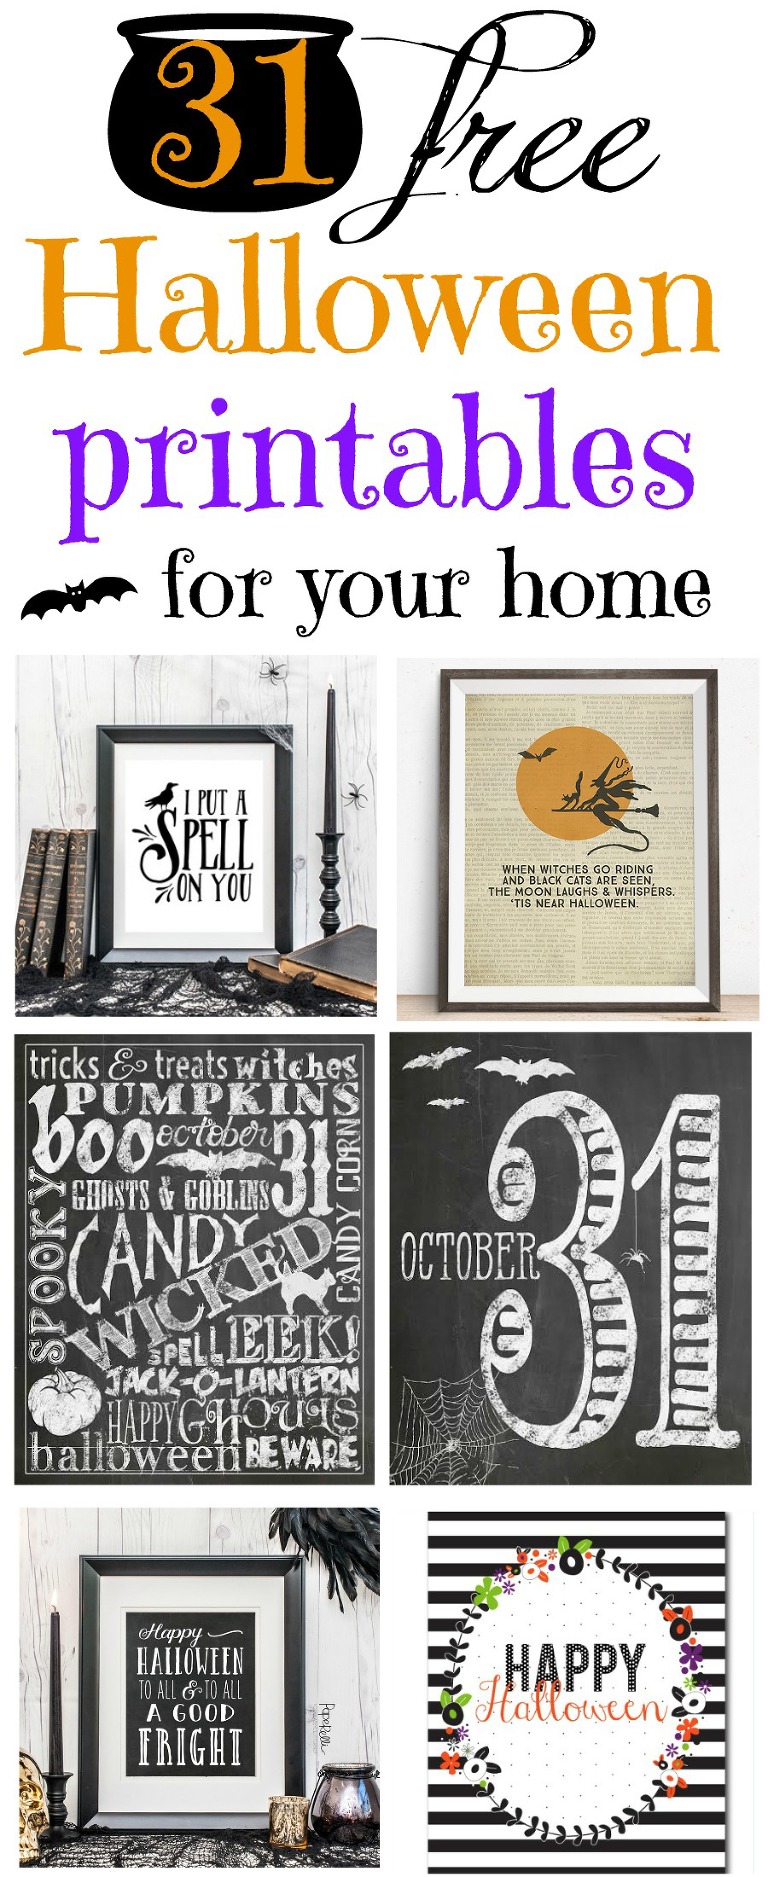 31-free-halloween-printables-for-your-home